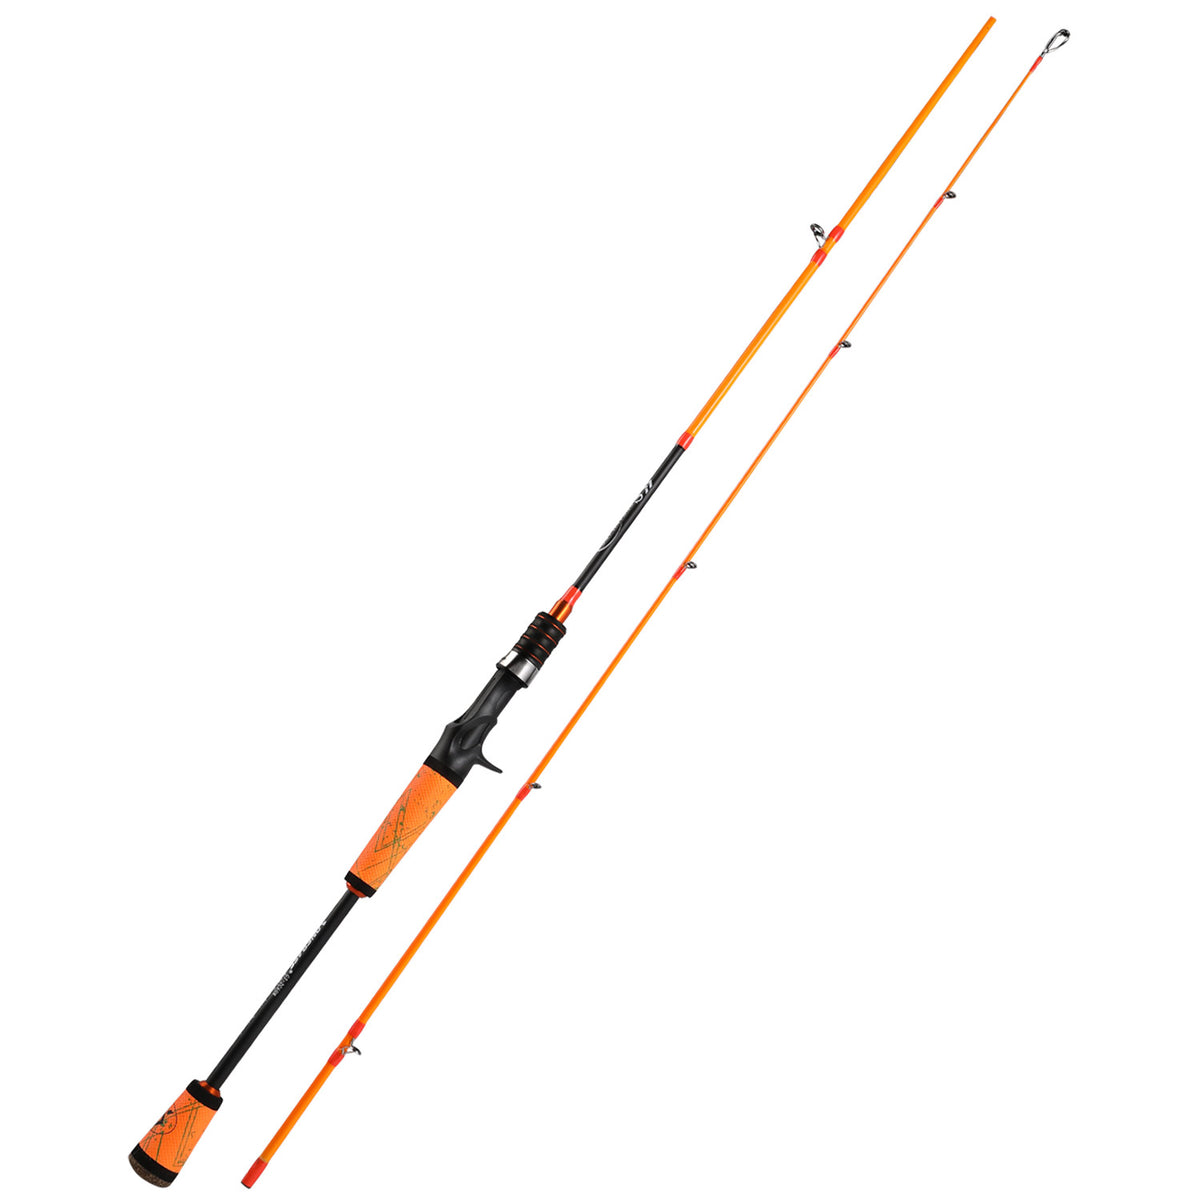 One Bass Fishing Rod and Reel Combo, Baitcasting Combo with